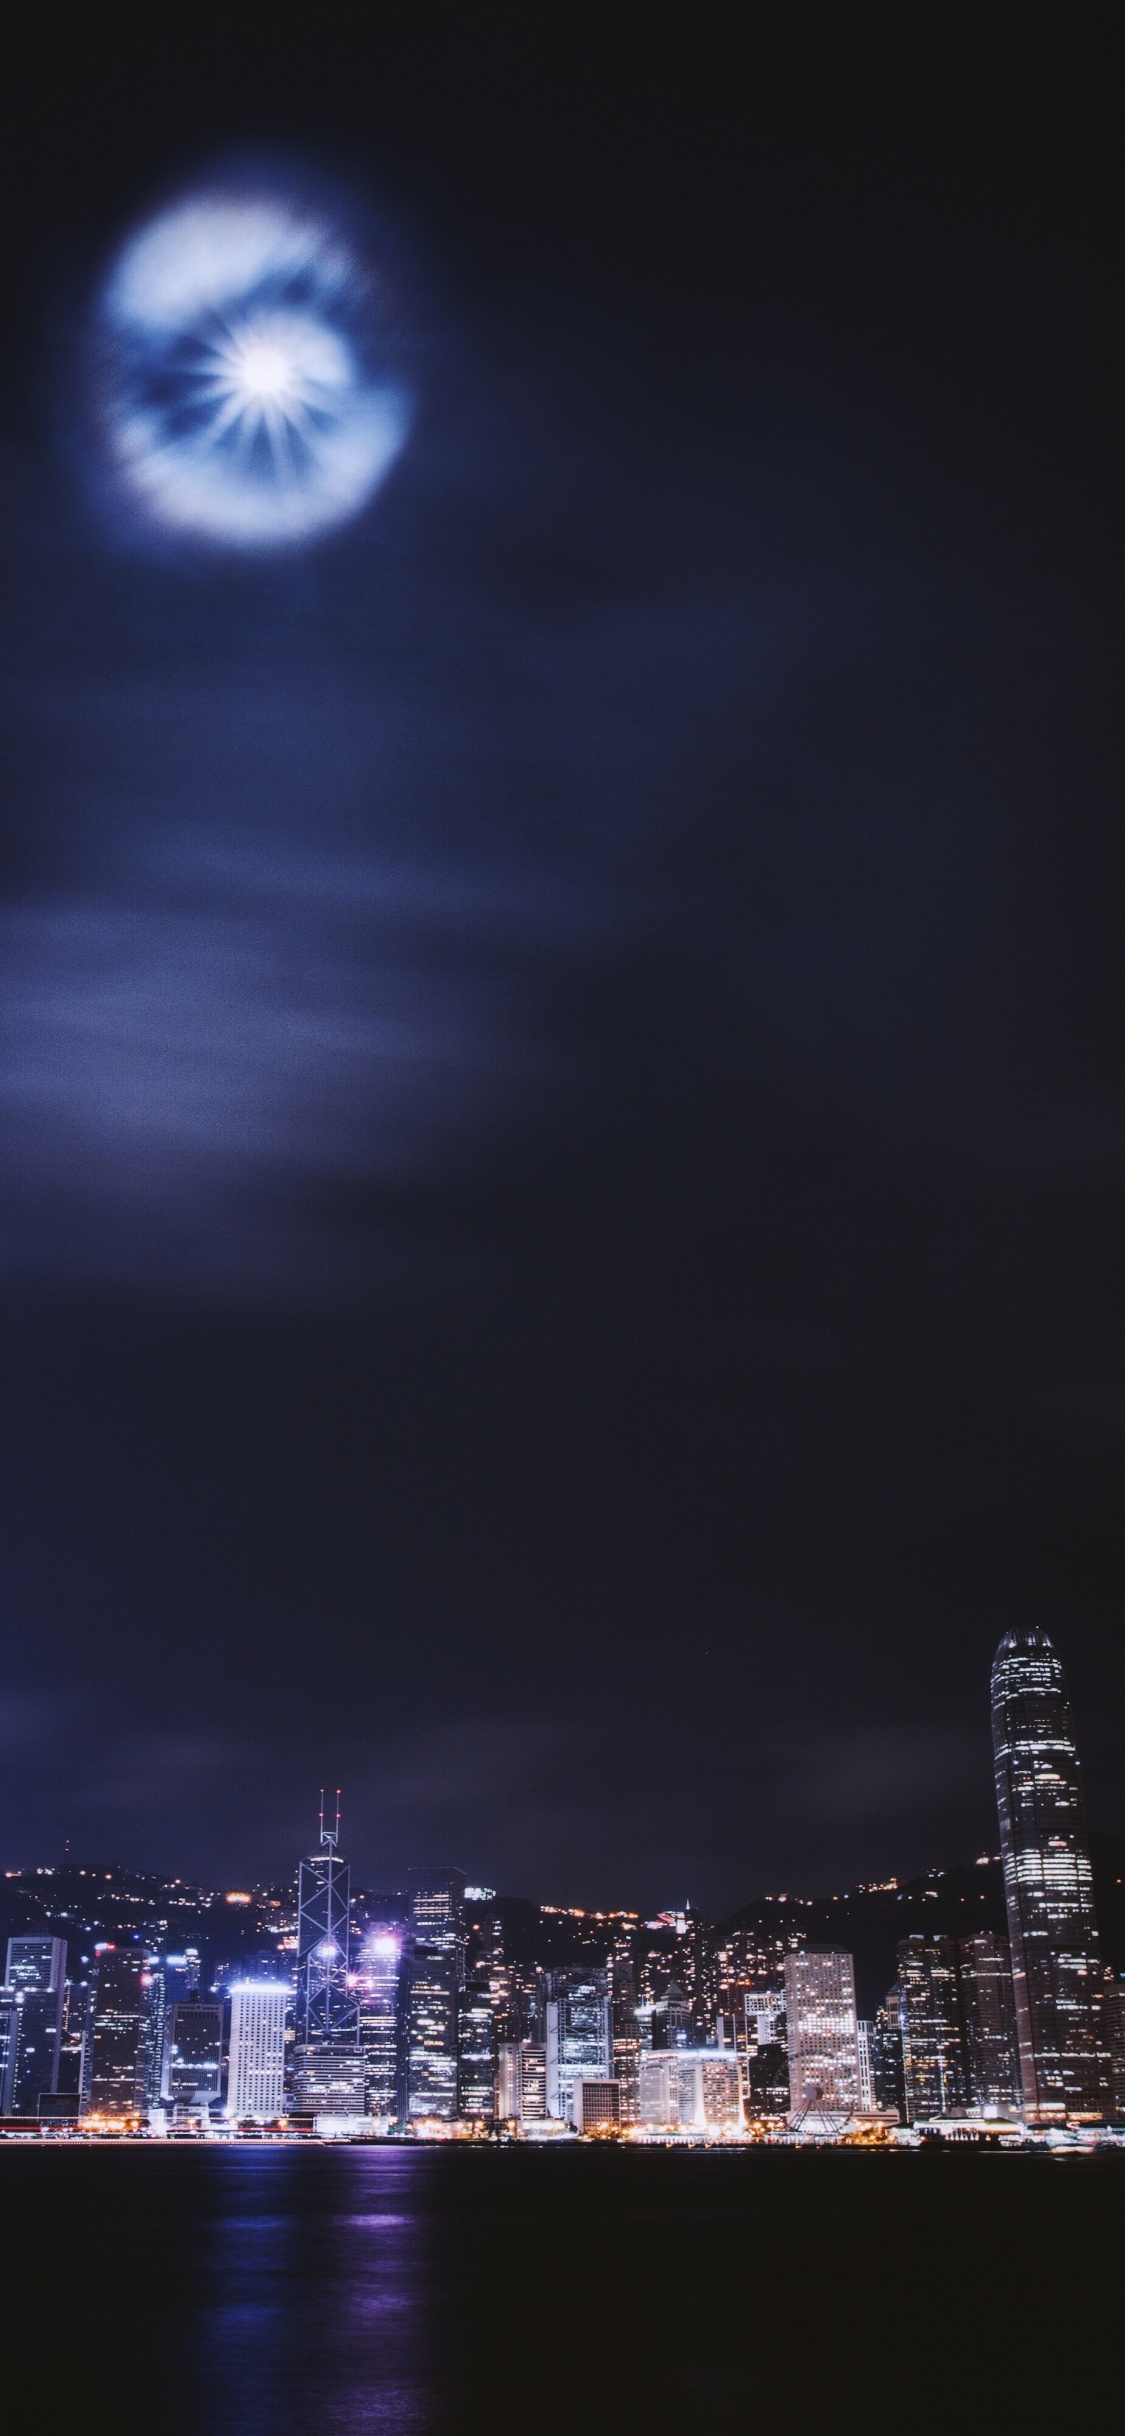 City Lights During Night Time. Wallpaper in 1125x2436 Resolution